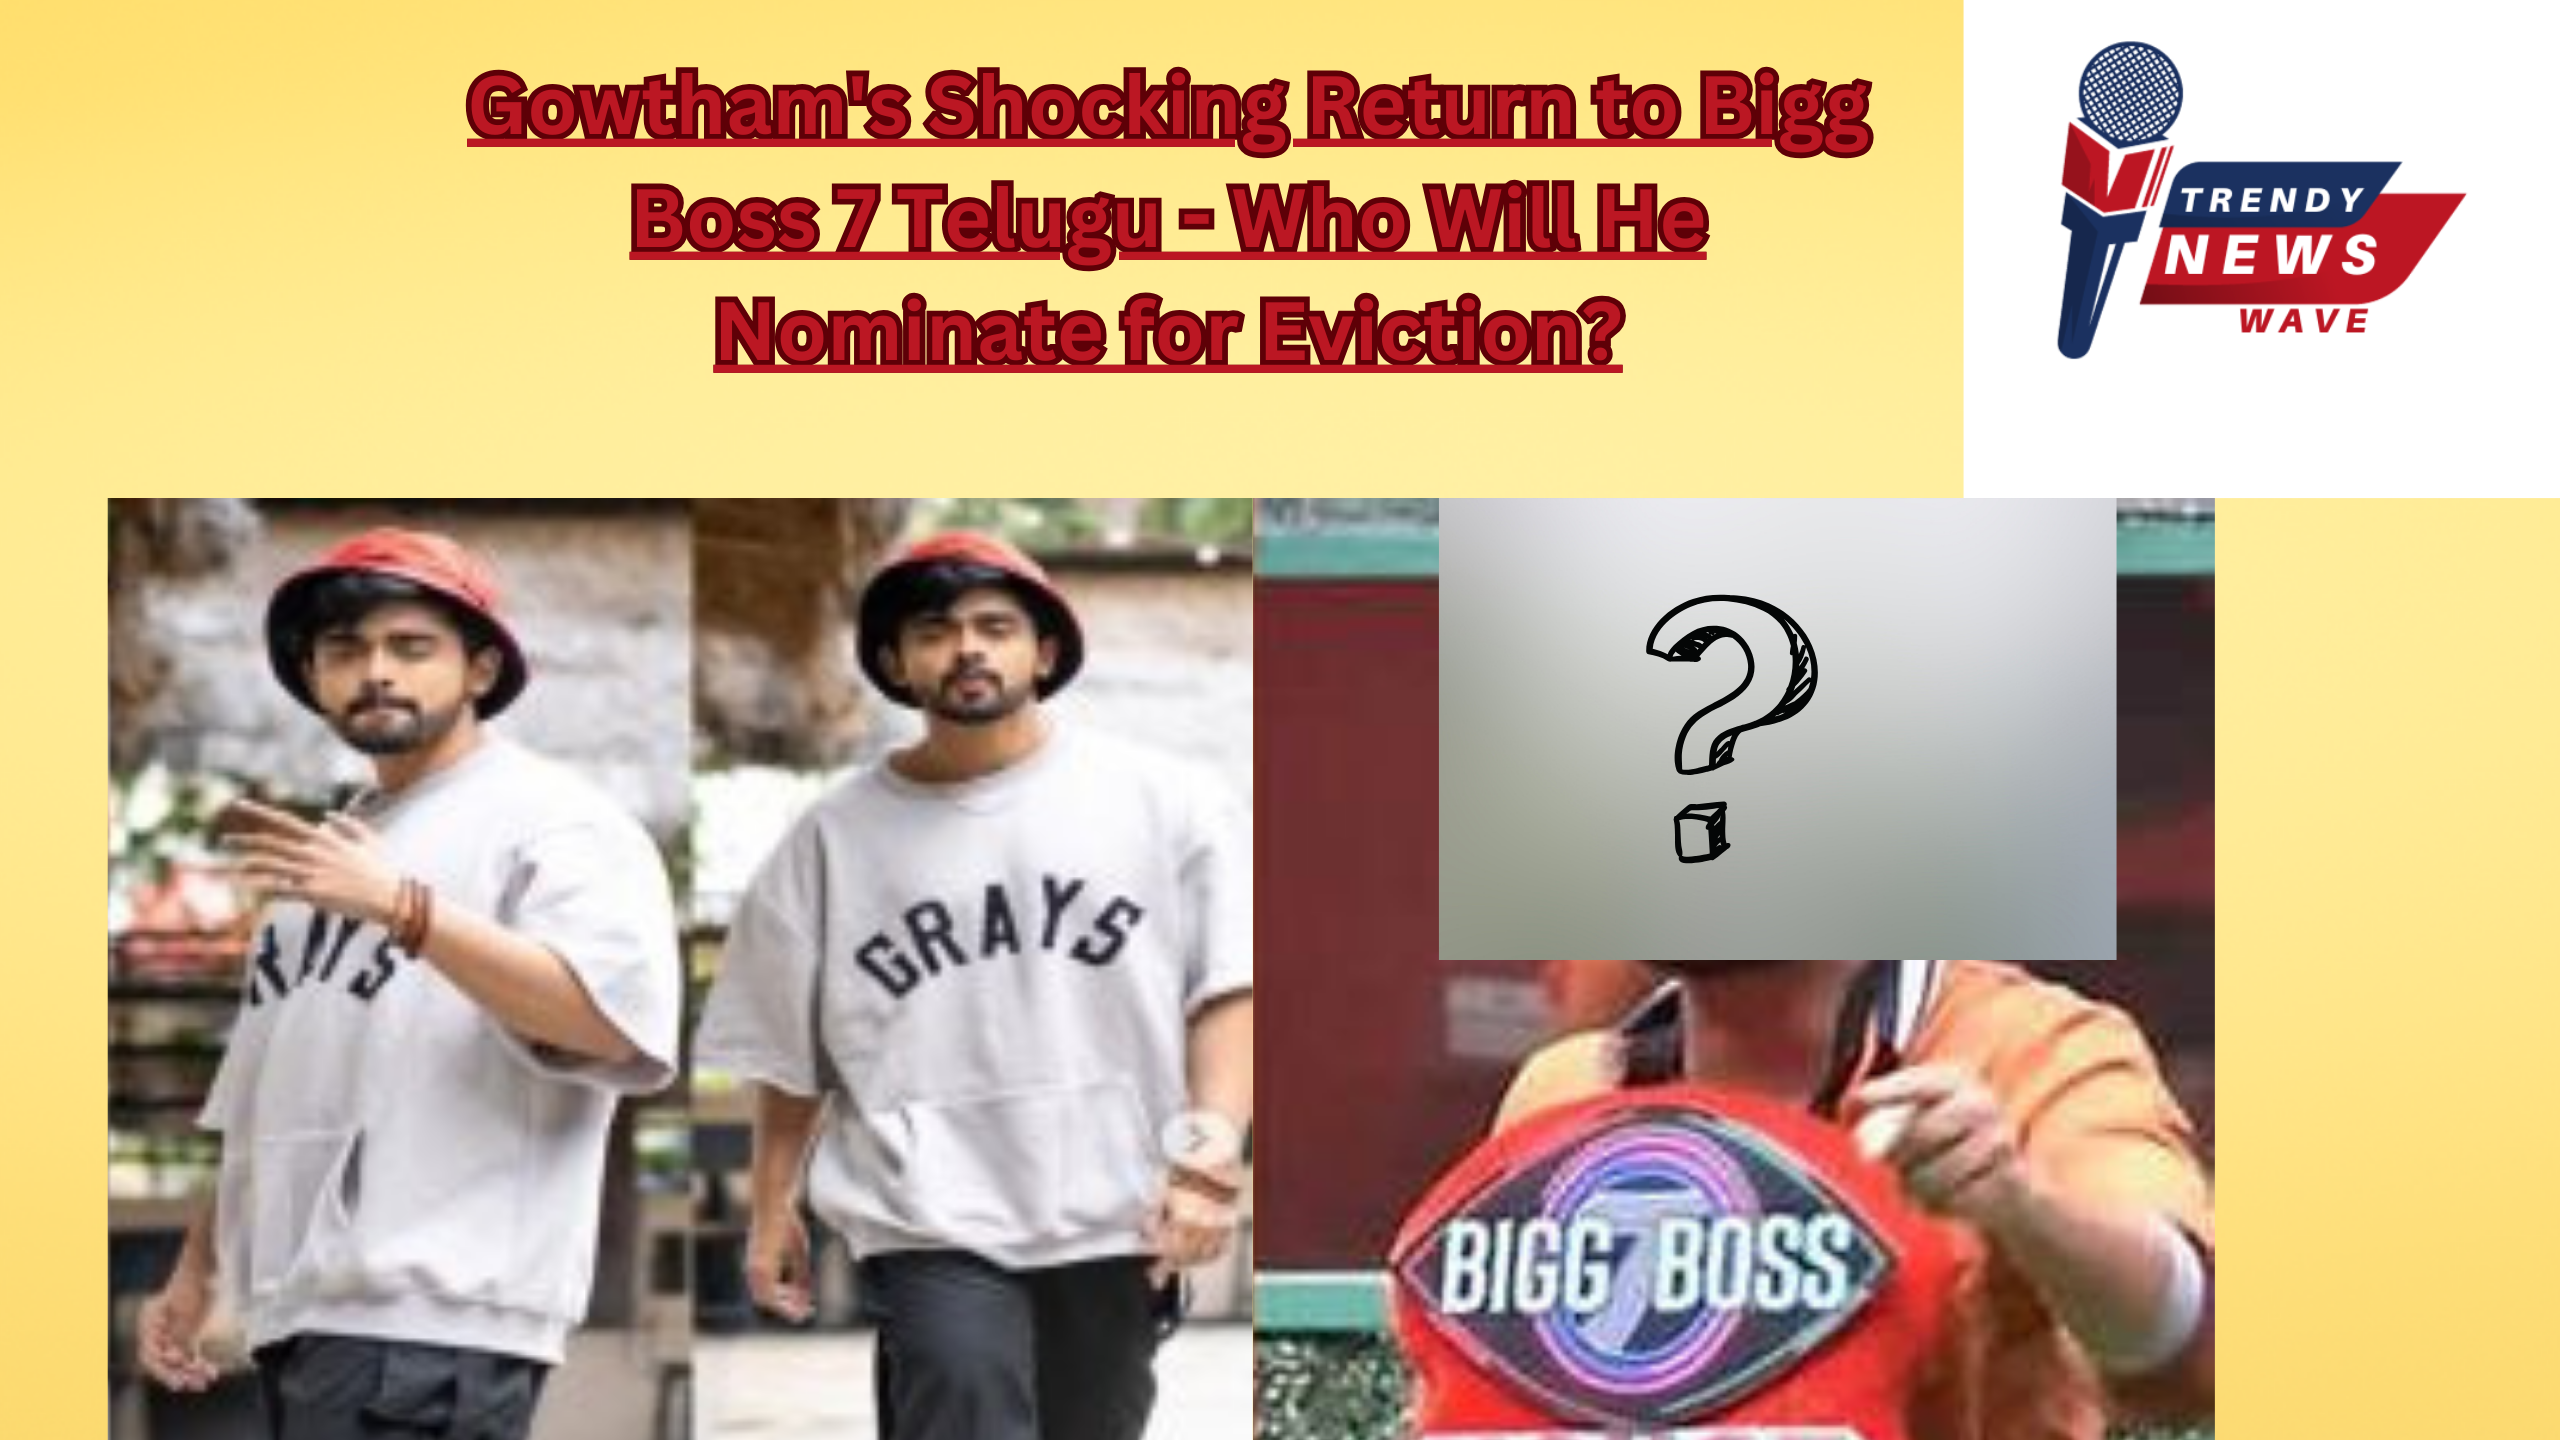 Gowtham's Shocking Return to Bigg Boss 7 Telugu - Who Will He Nominate for Eviction?